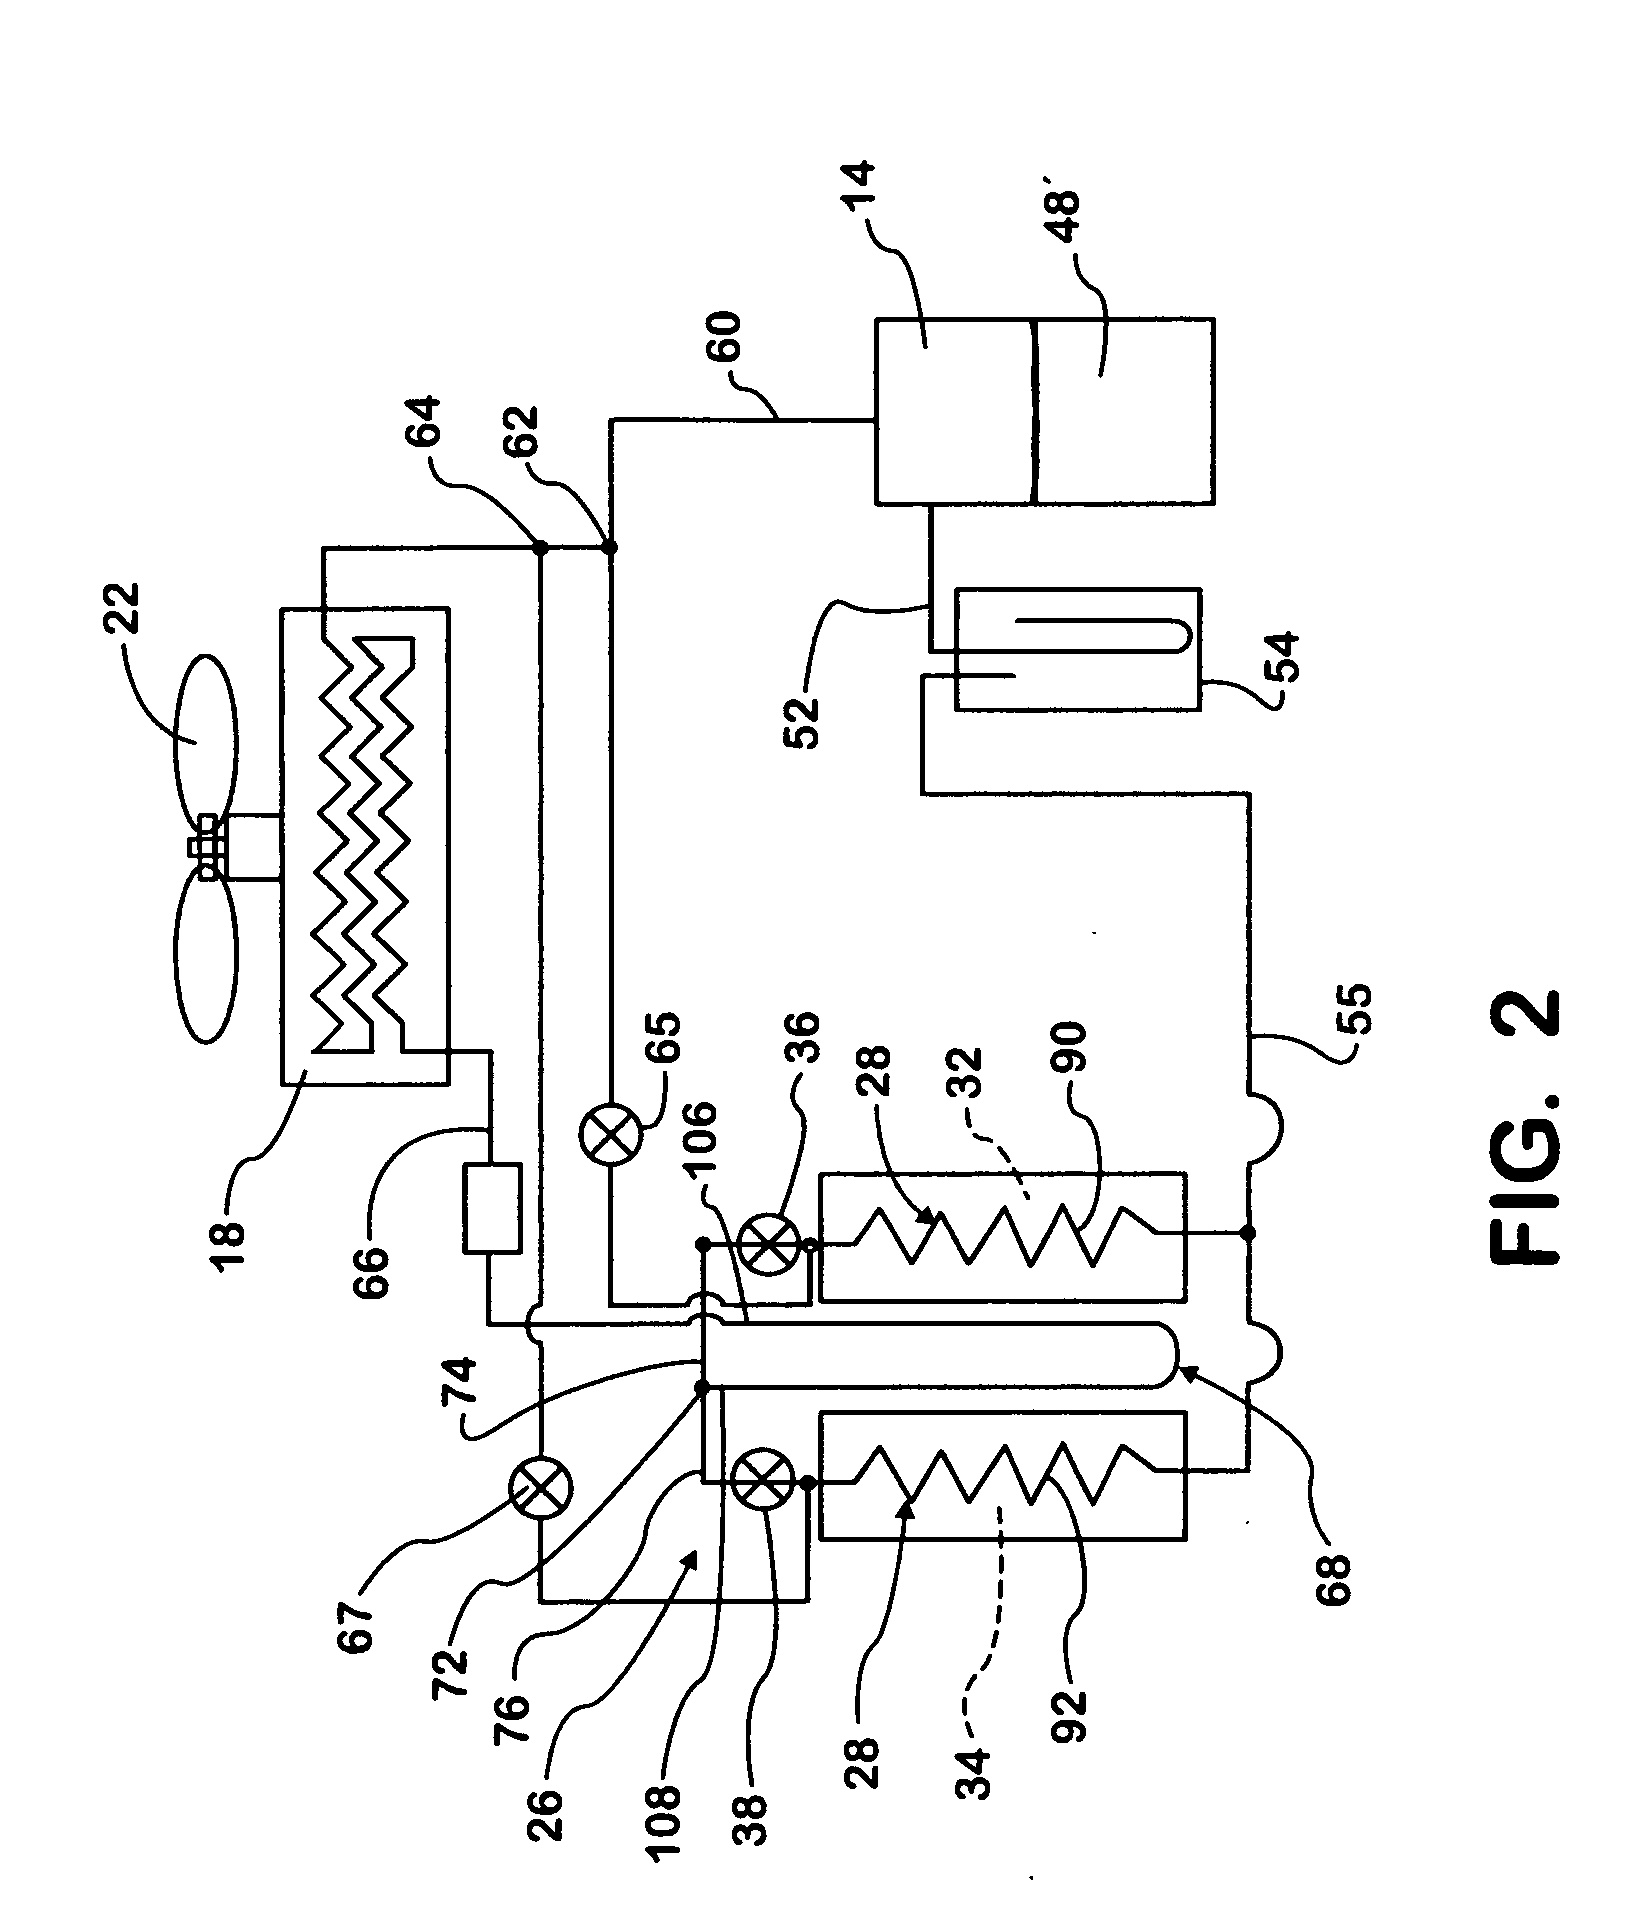 Auxiliary sub-cooler for refrigerated dispenser